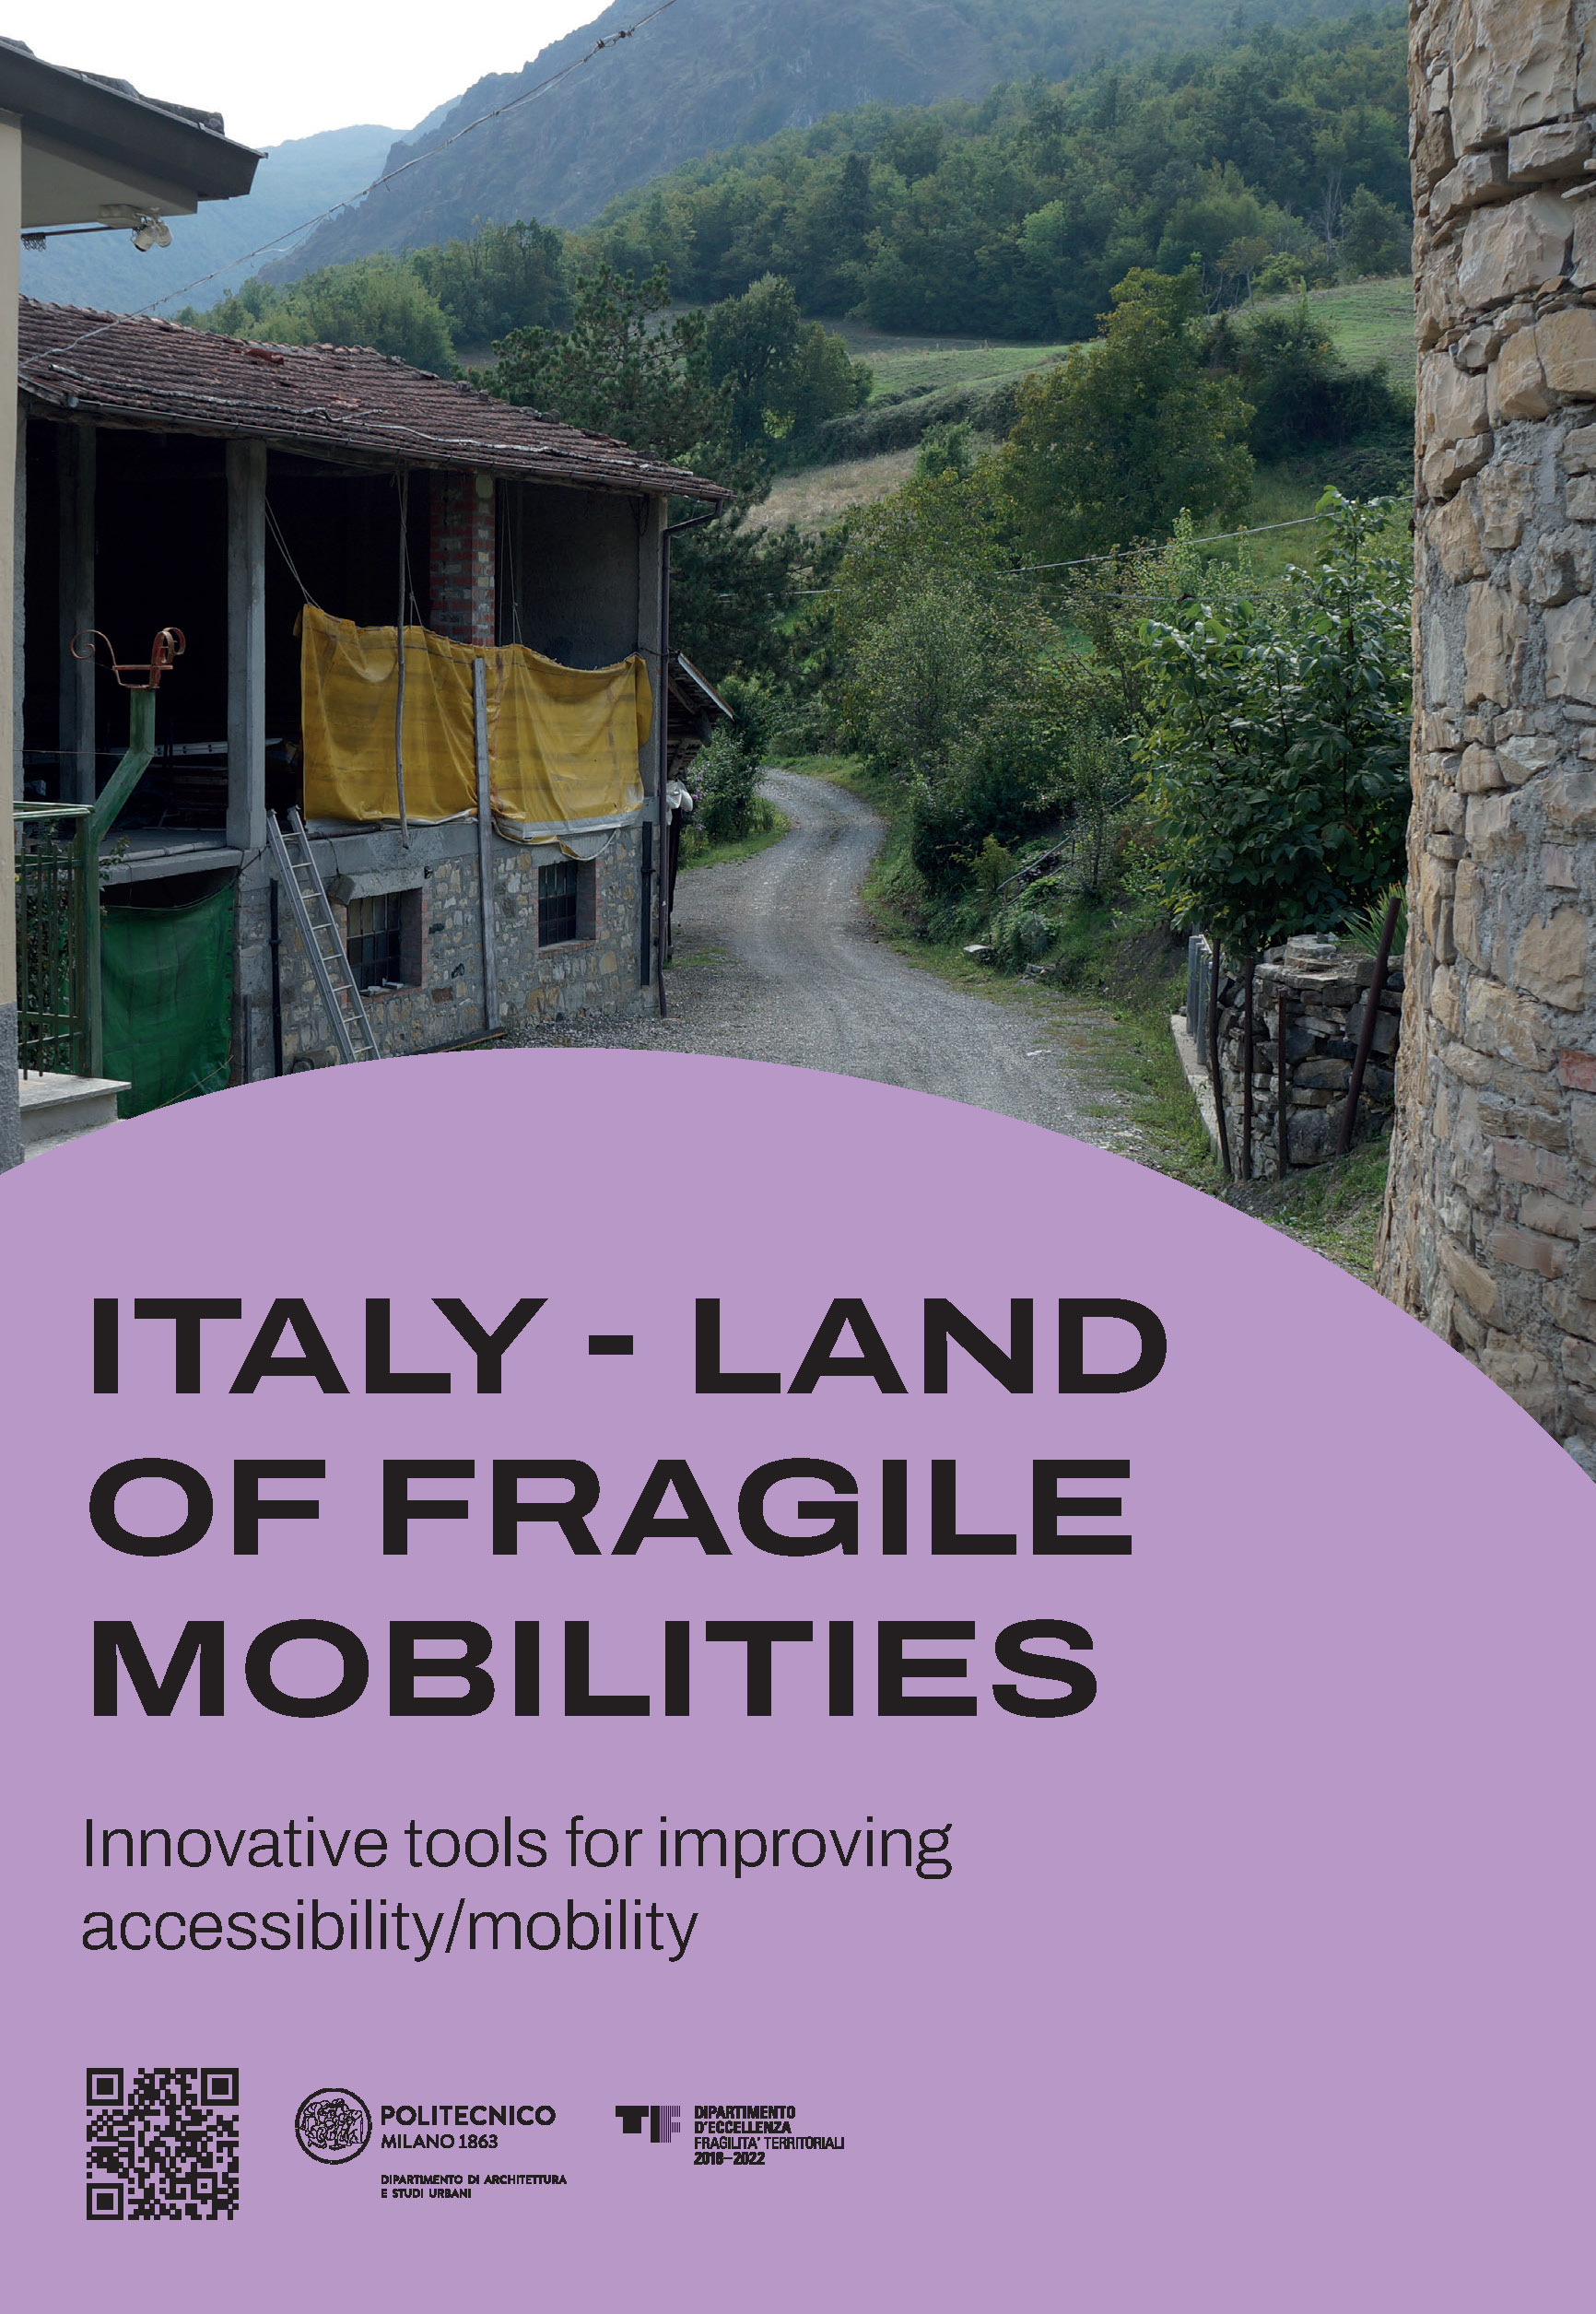 ITALY – LAND OF FRAGILE MOBILITIES. Innovative tools for improving accessibility/mobility